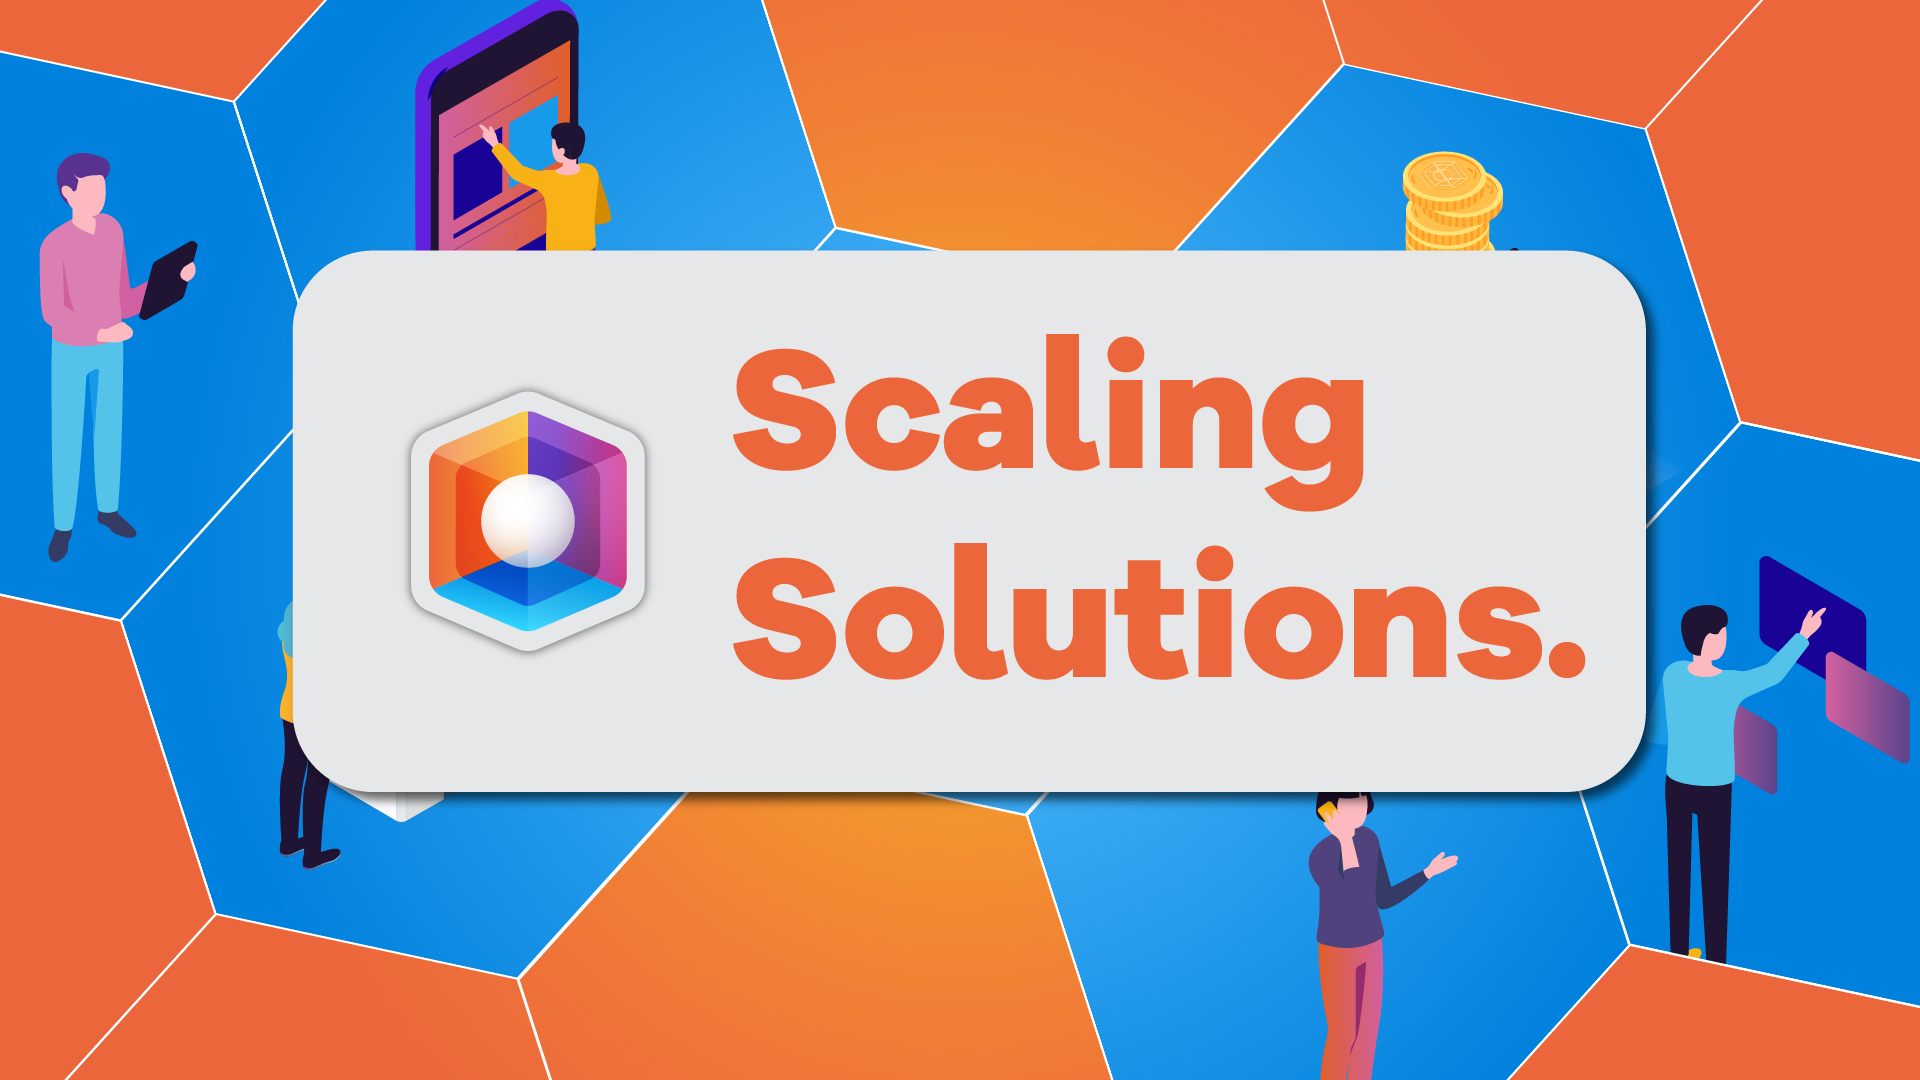 On Scaling Solutions